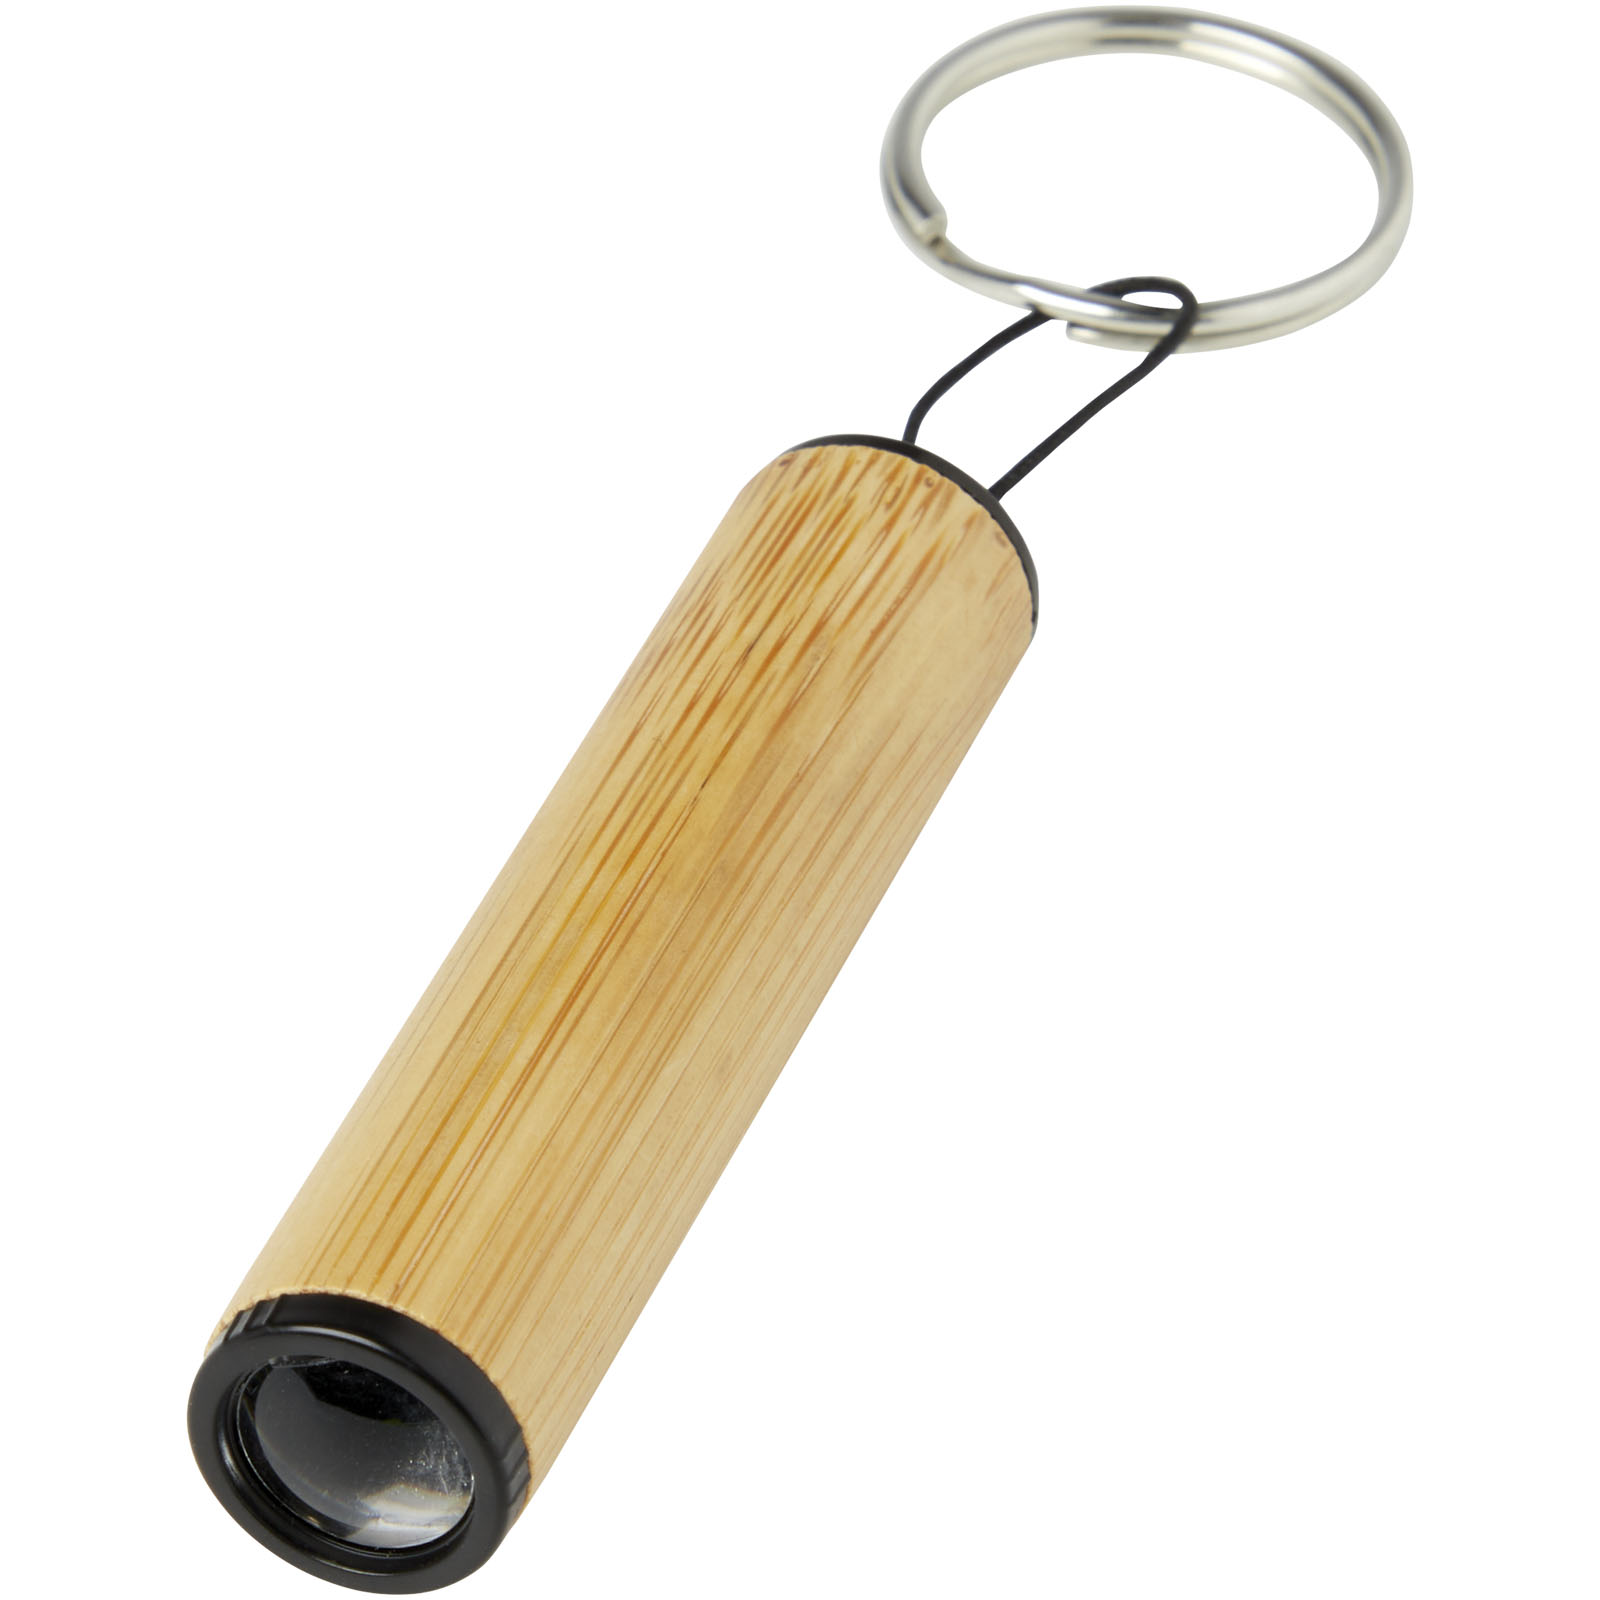 Advertising Lamps - Cane bamboo key ring with light - 0